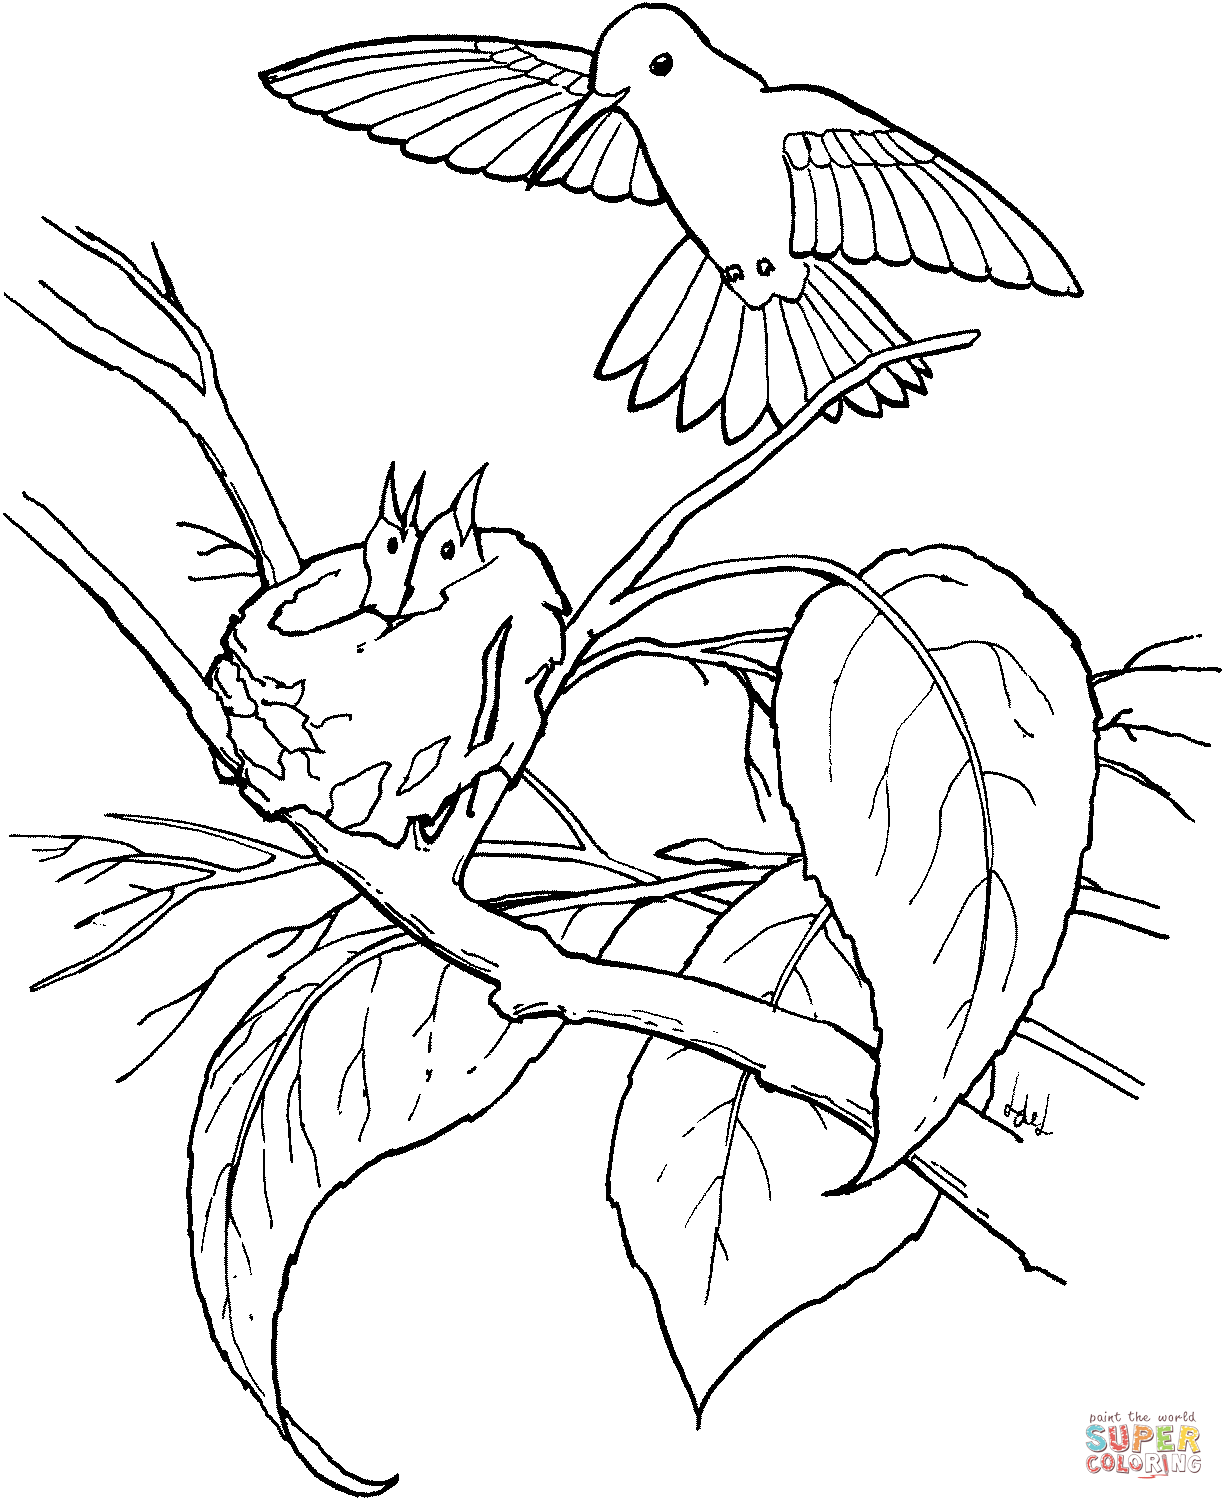 hummingbird colouring pages hummingbird coloring pages to download and print for free pages hummingbird colouring 